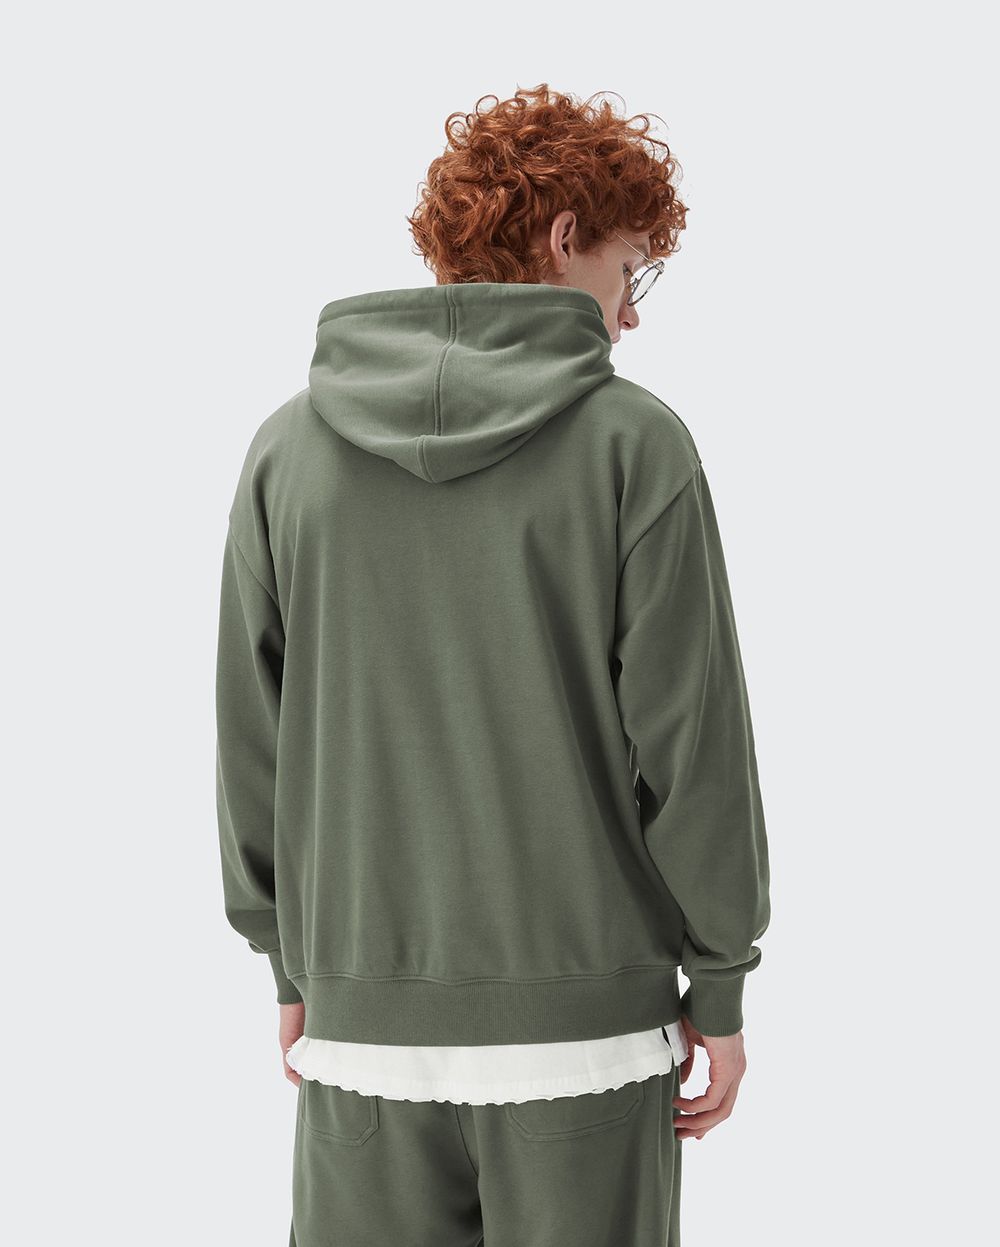 Classic Unisex Solid Color Hoodies